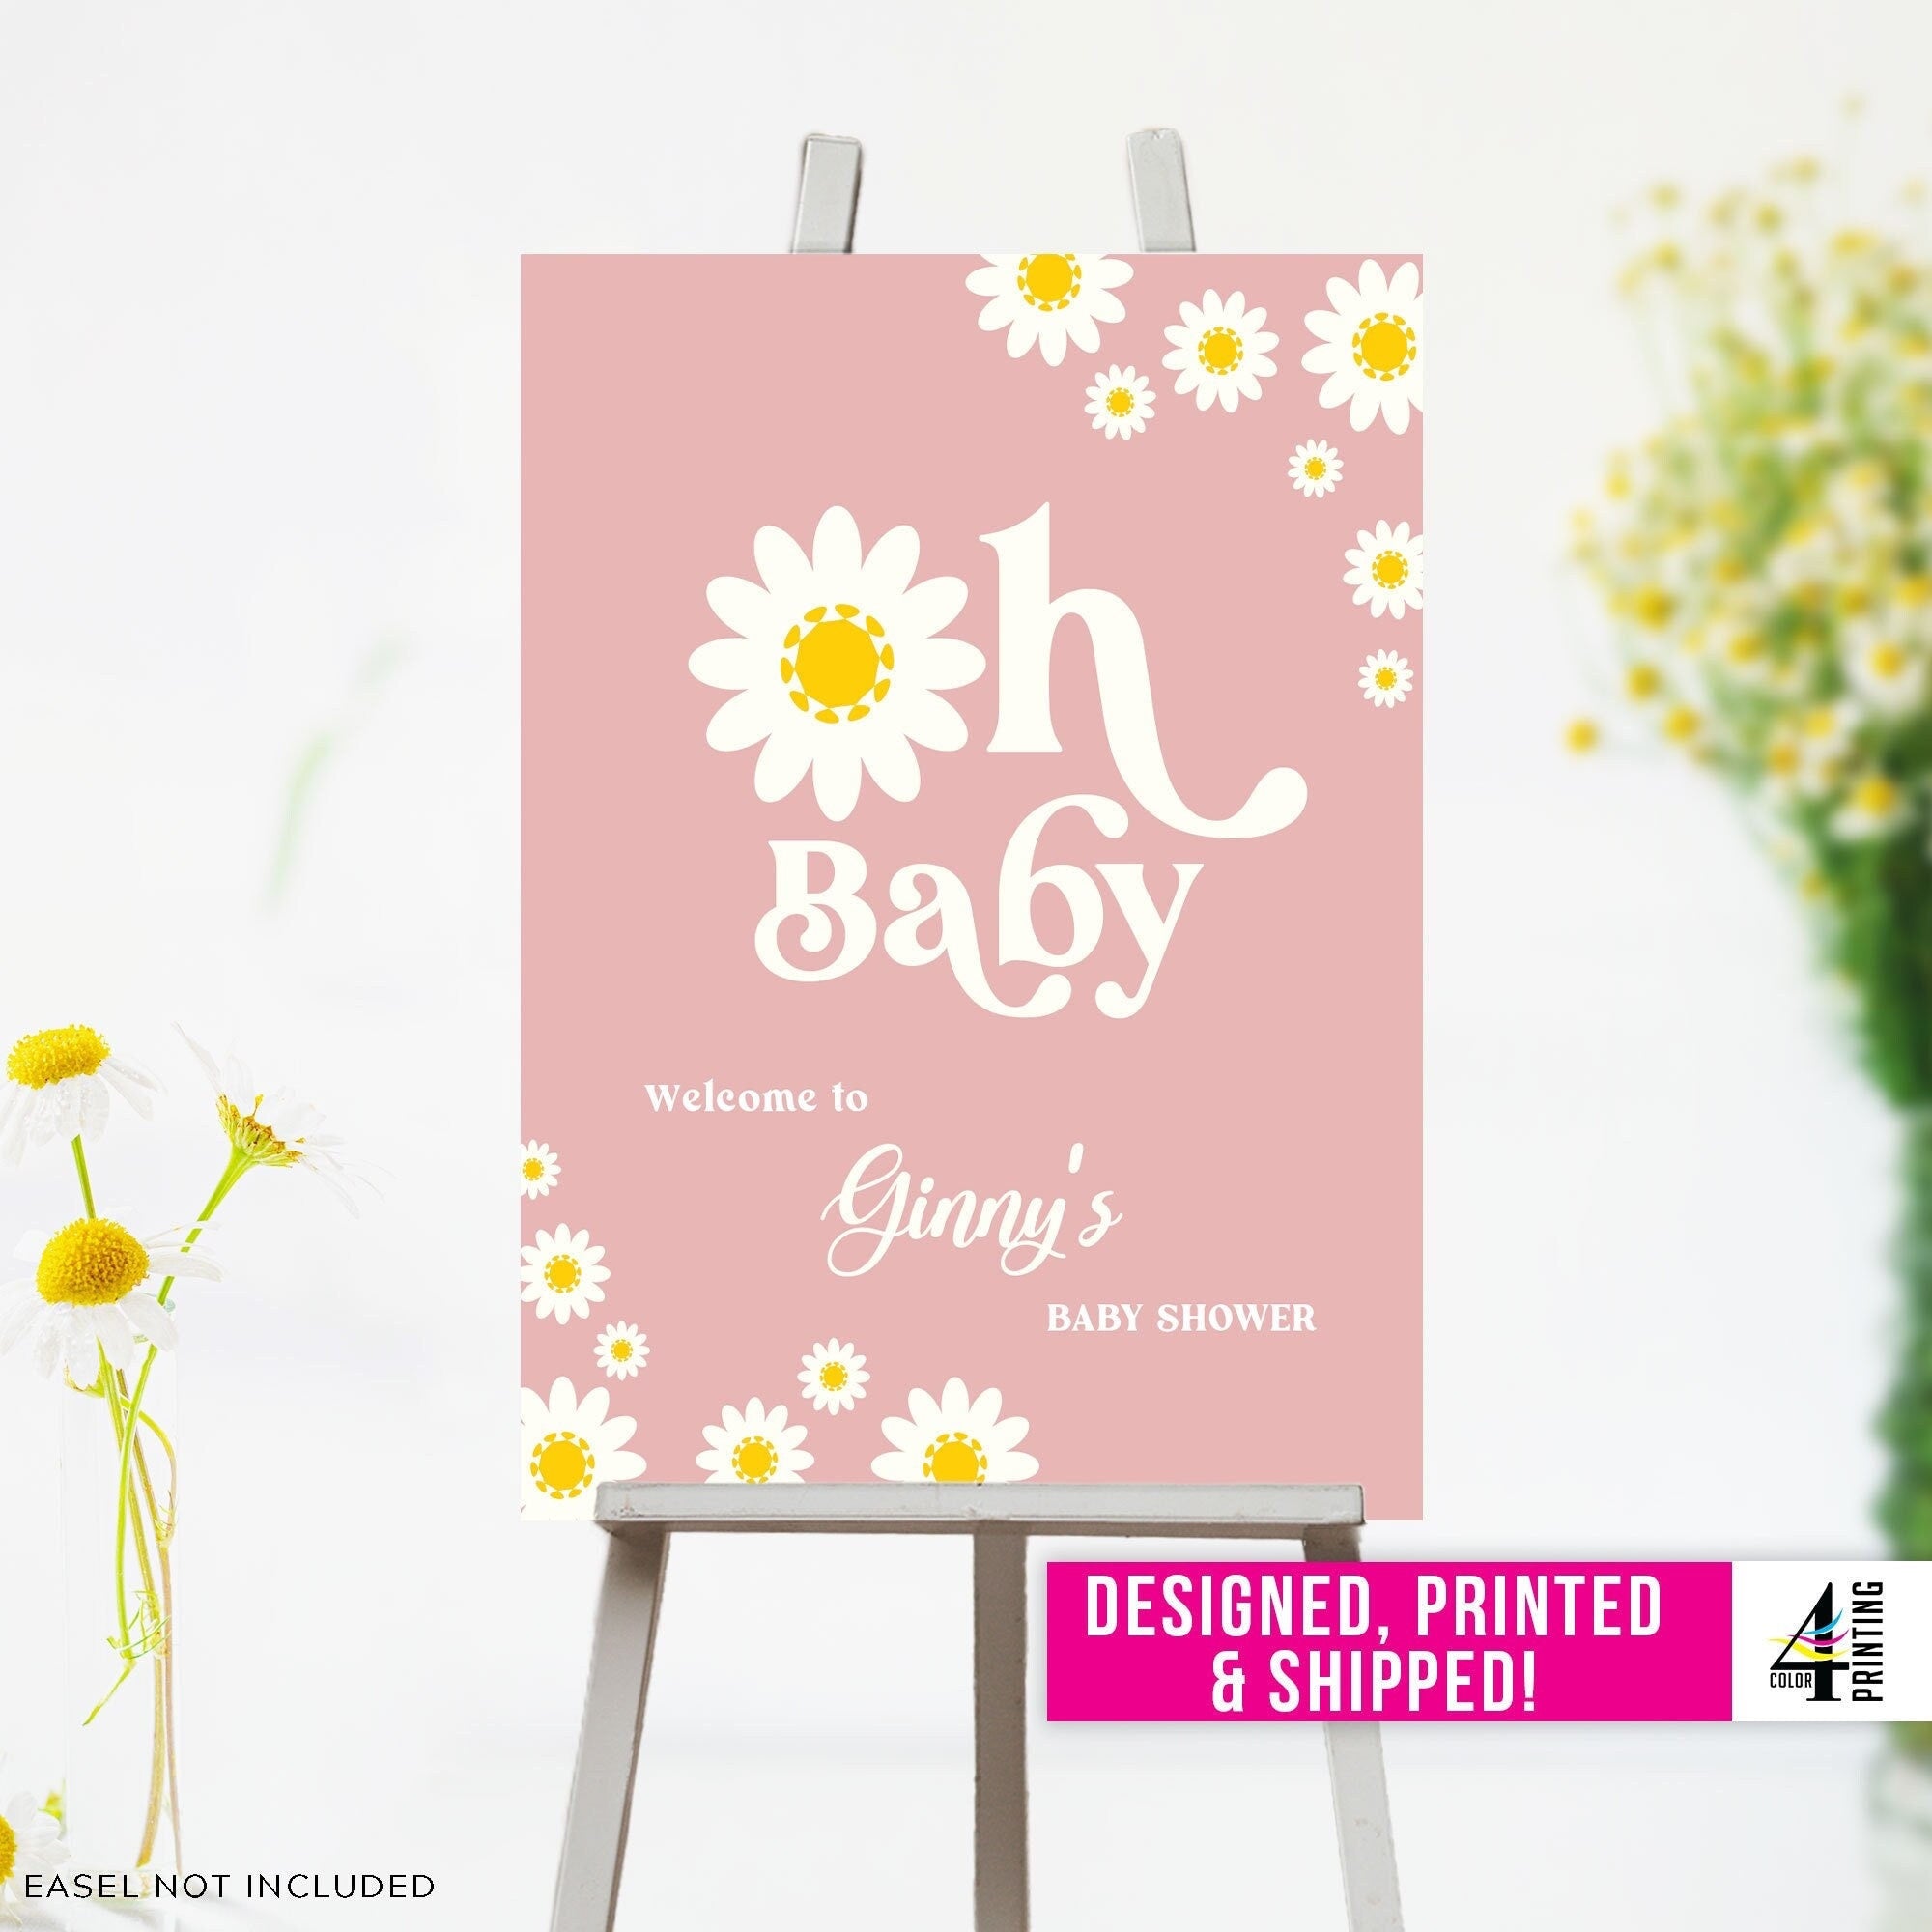 "Oh Baby" Baby Shower Welcome Sign